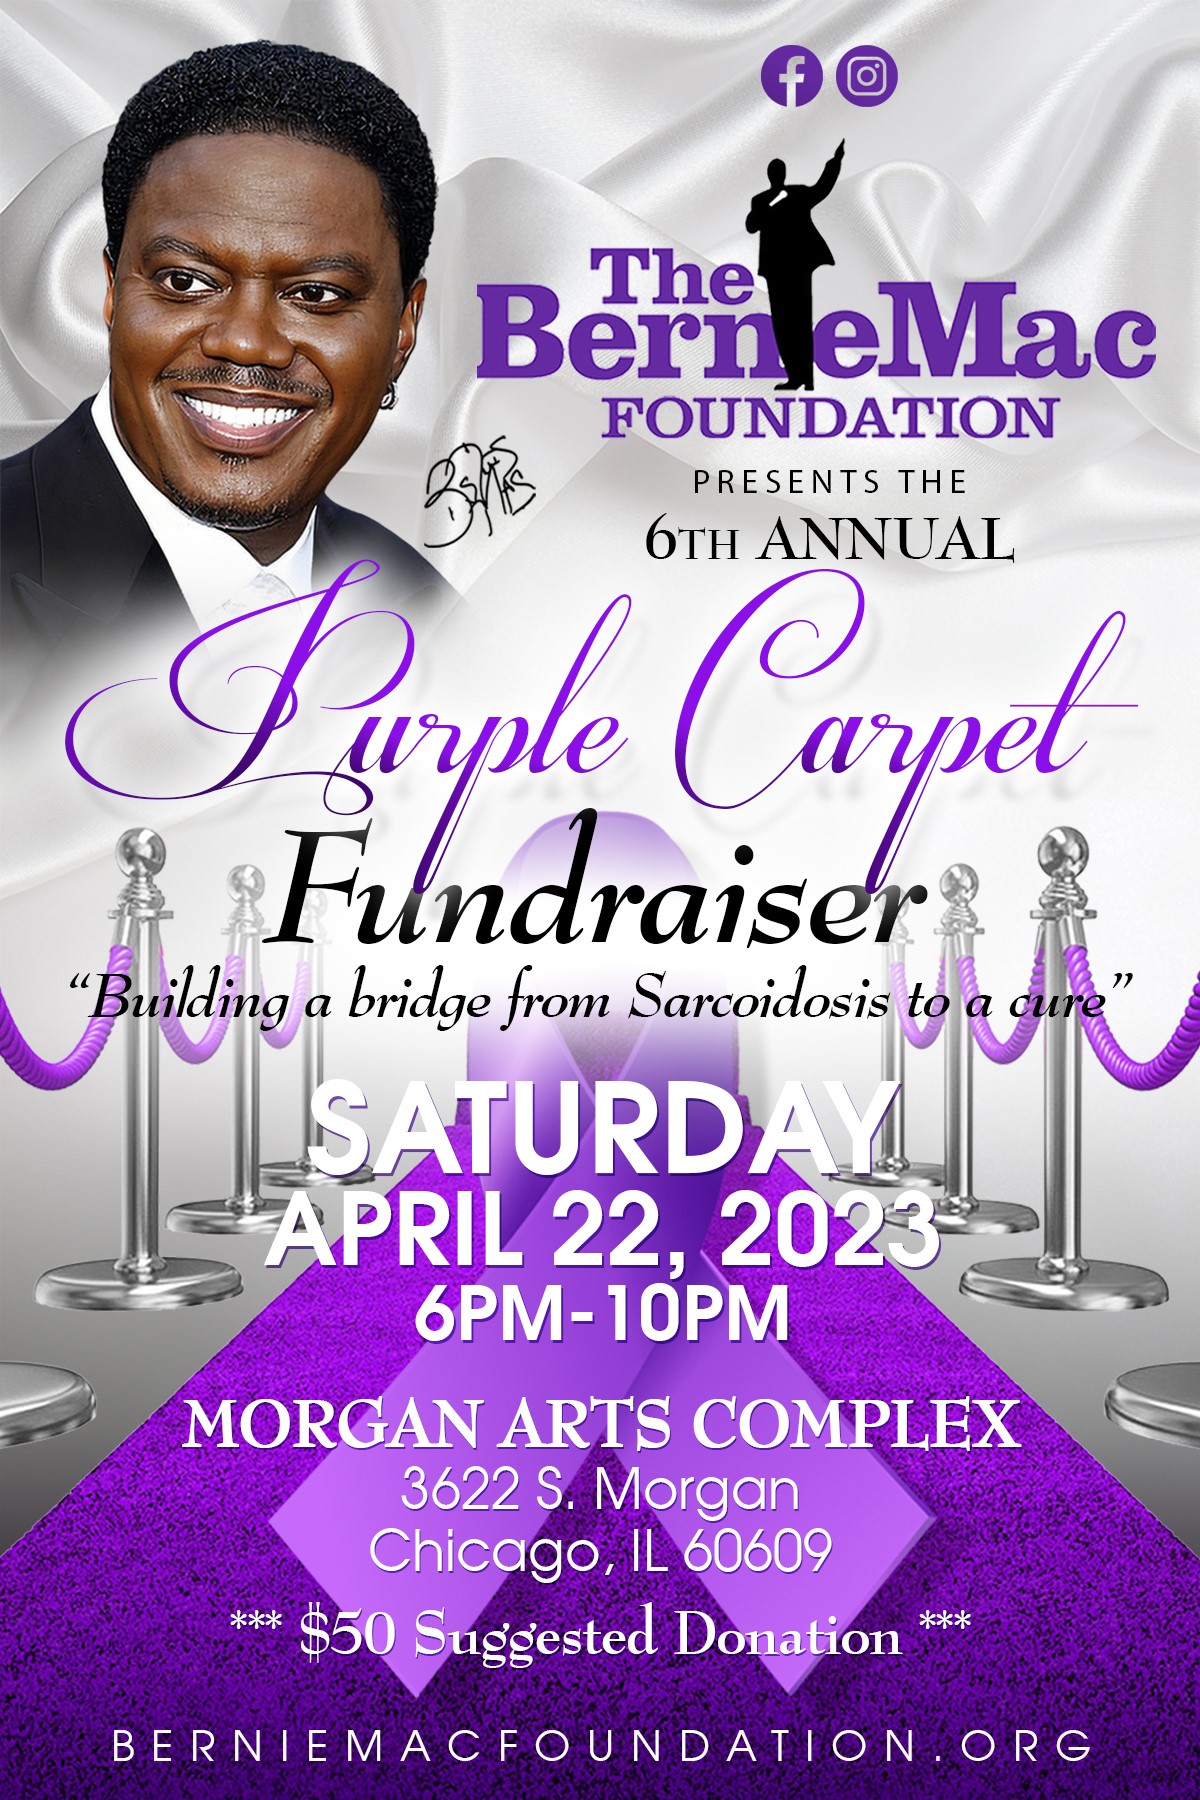 Purple Carpet Fundraiser Event 2023  on Apr 22, 18:00@Morgan Arts Complex - Buy tickets and Get information on berniemacfoundation.org 